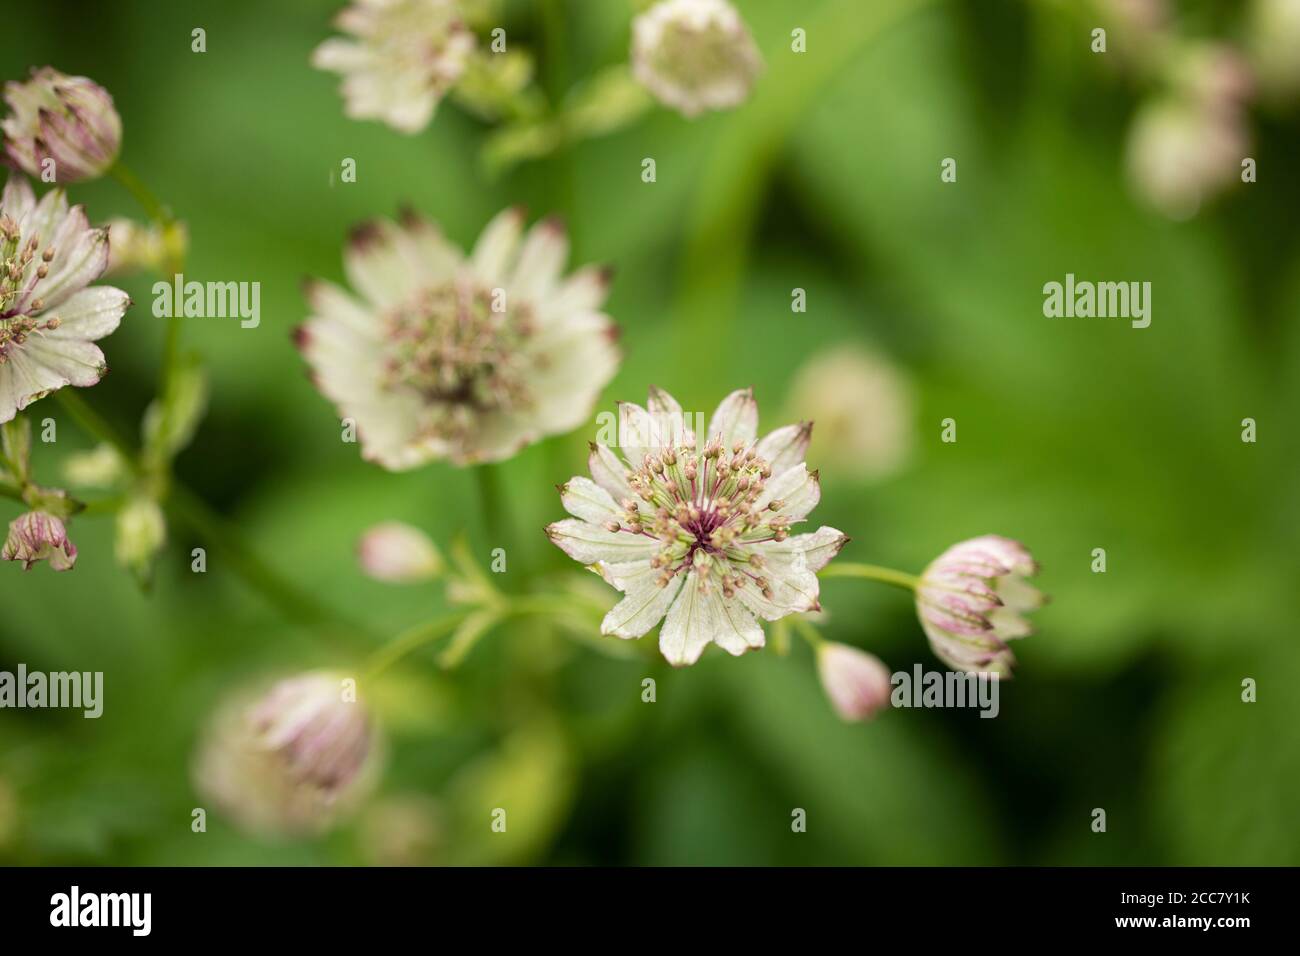 Astrantia major, the great masterwort, is a species of flowering plant in the family Apiaceae, native to central and eastern Europe. Stock Photo